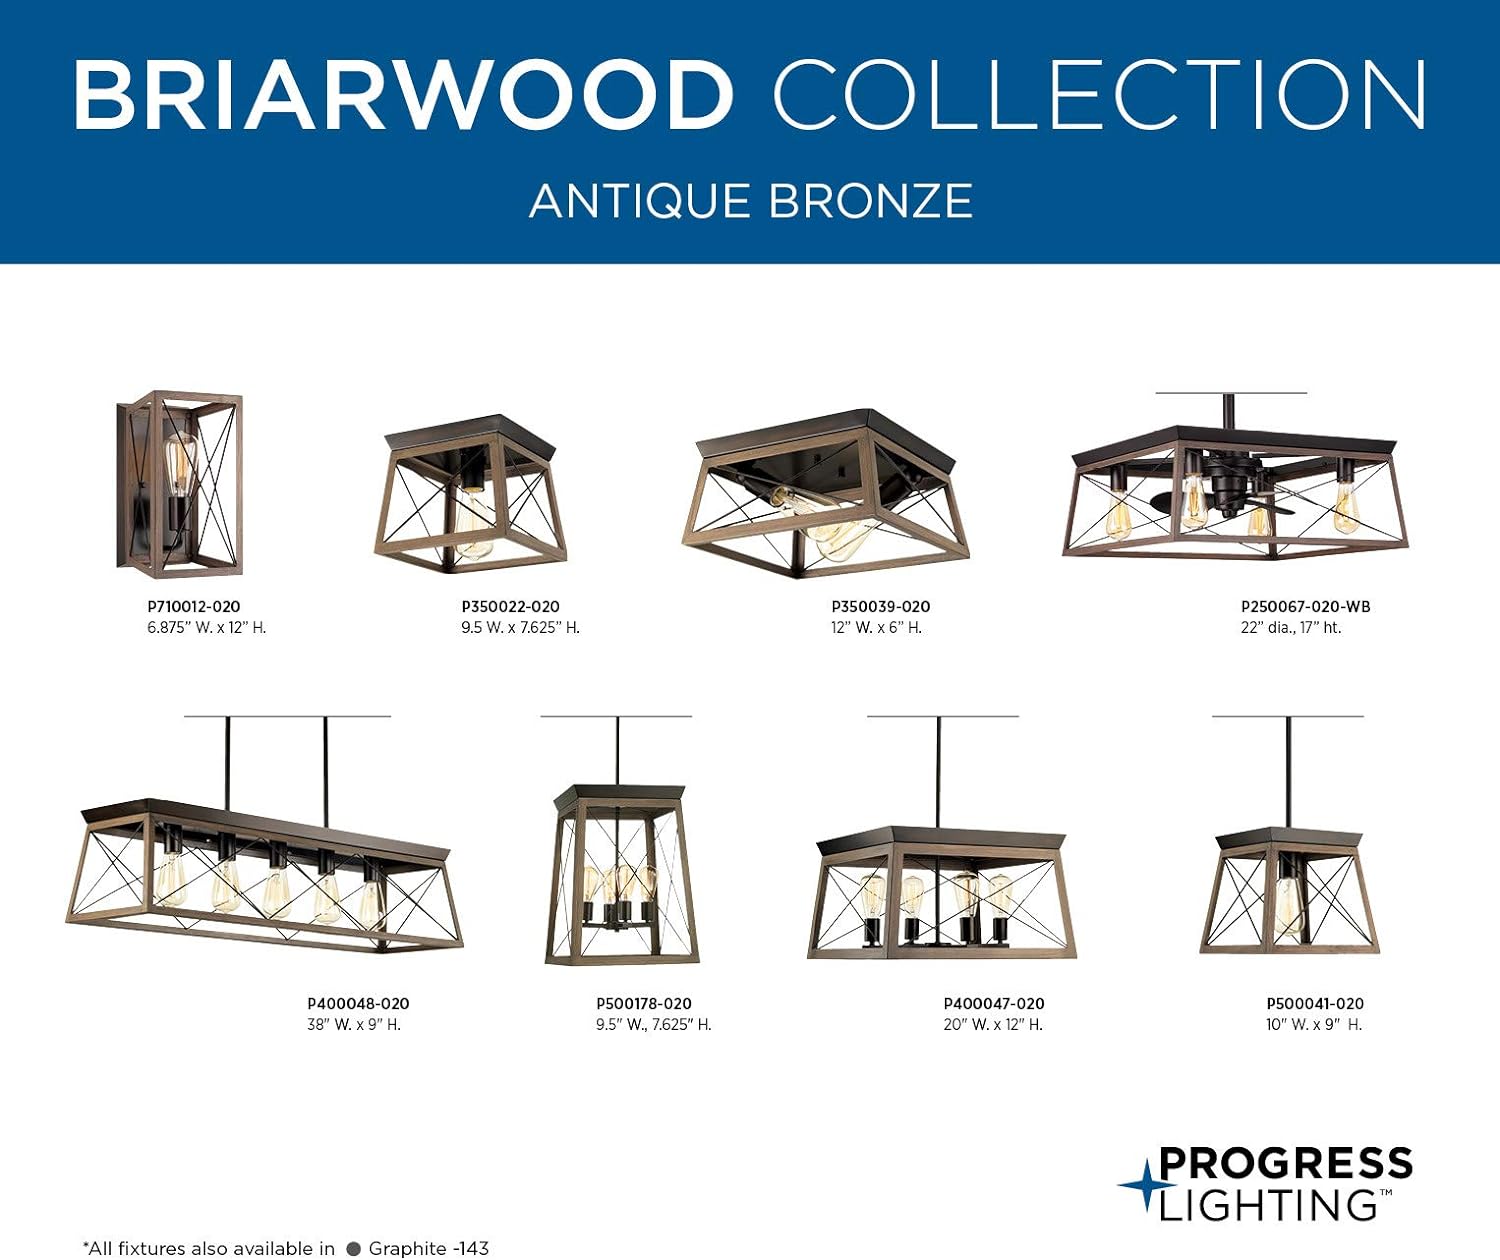 Transform Your Home with the Progress Lighting P350022-020 Briarwood Collection Farmhouse Flush Mount Ceiling Light